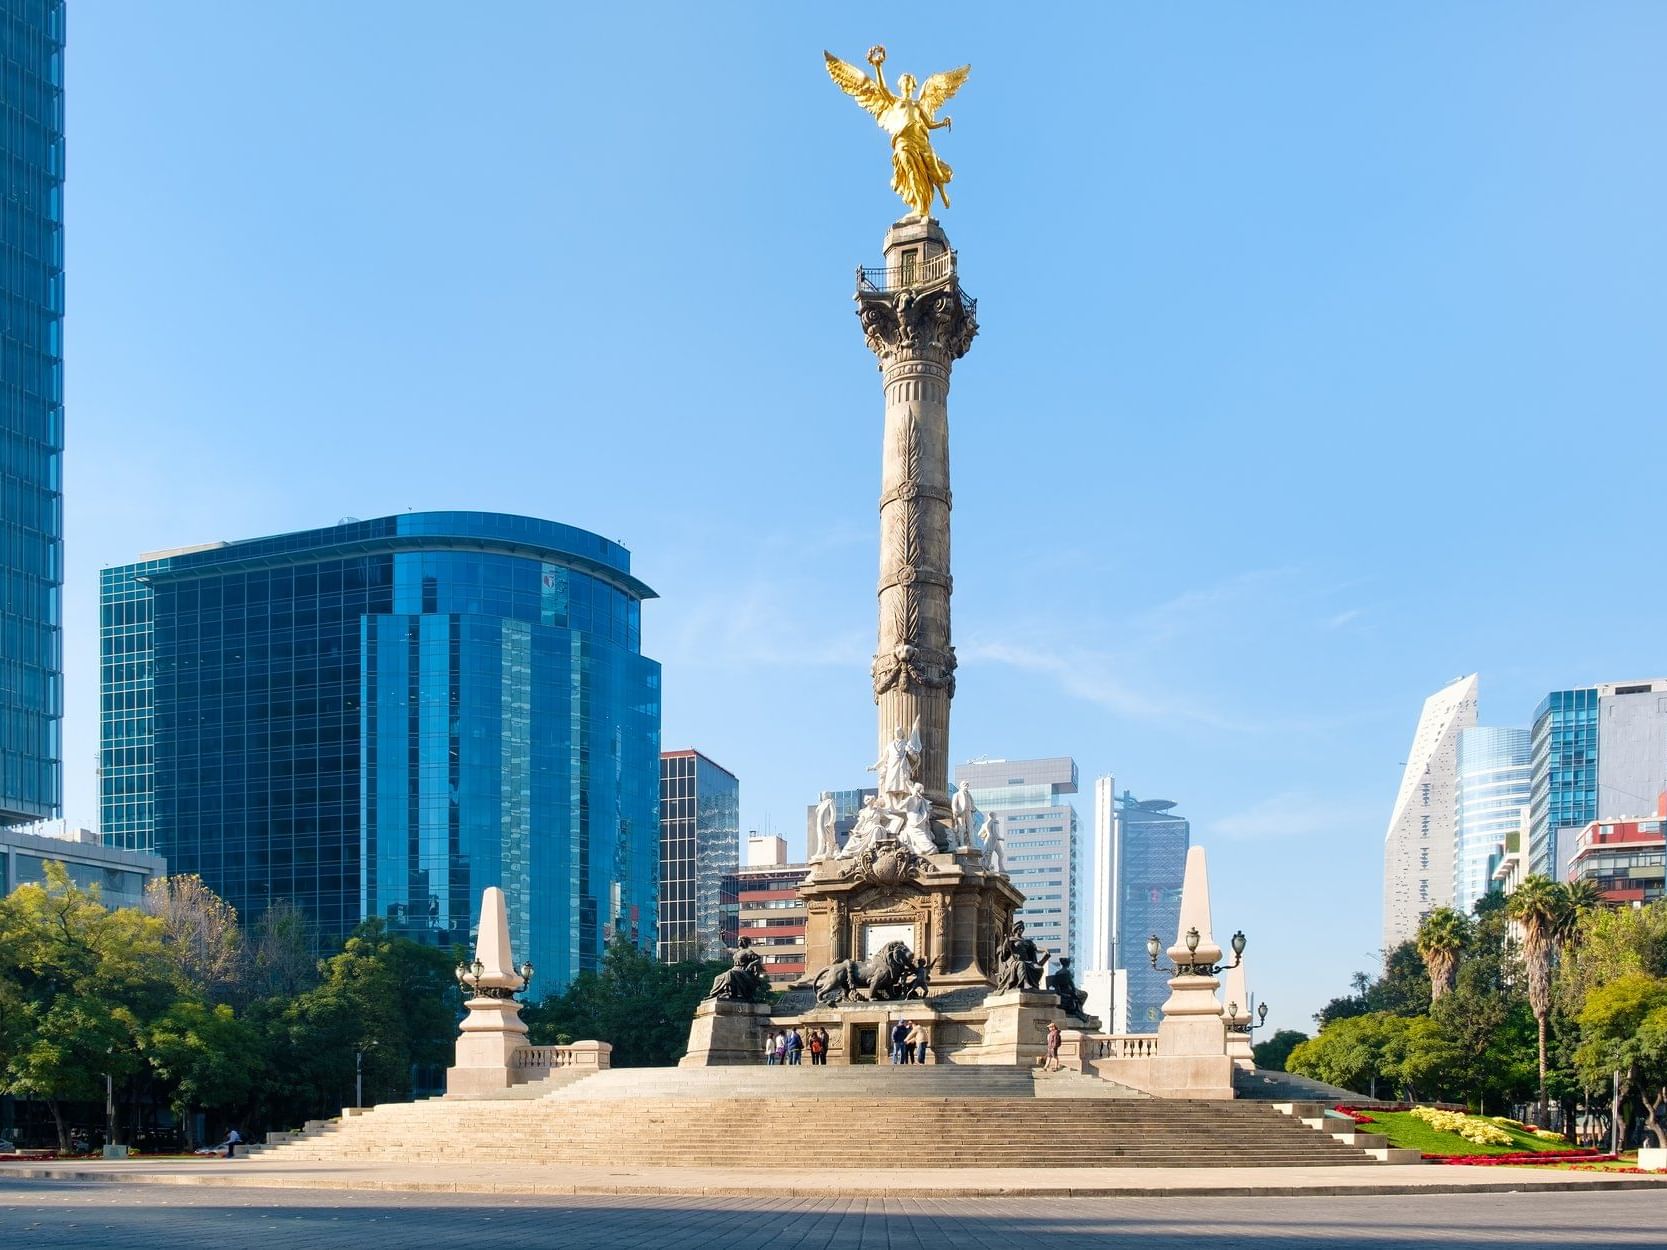 The Angel of Independence in Mexico City near La Colección